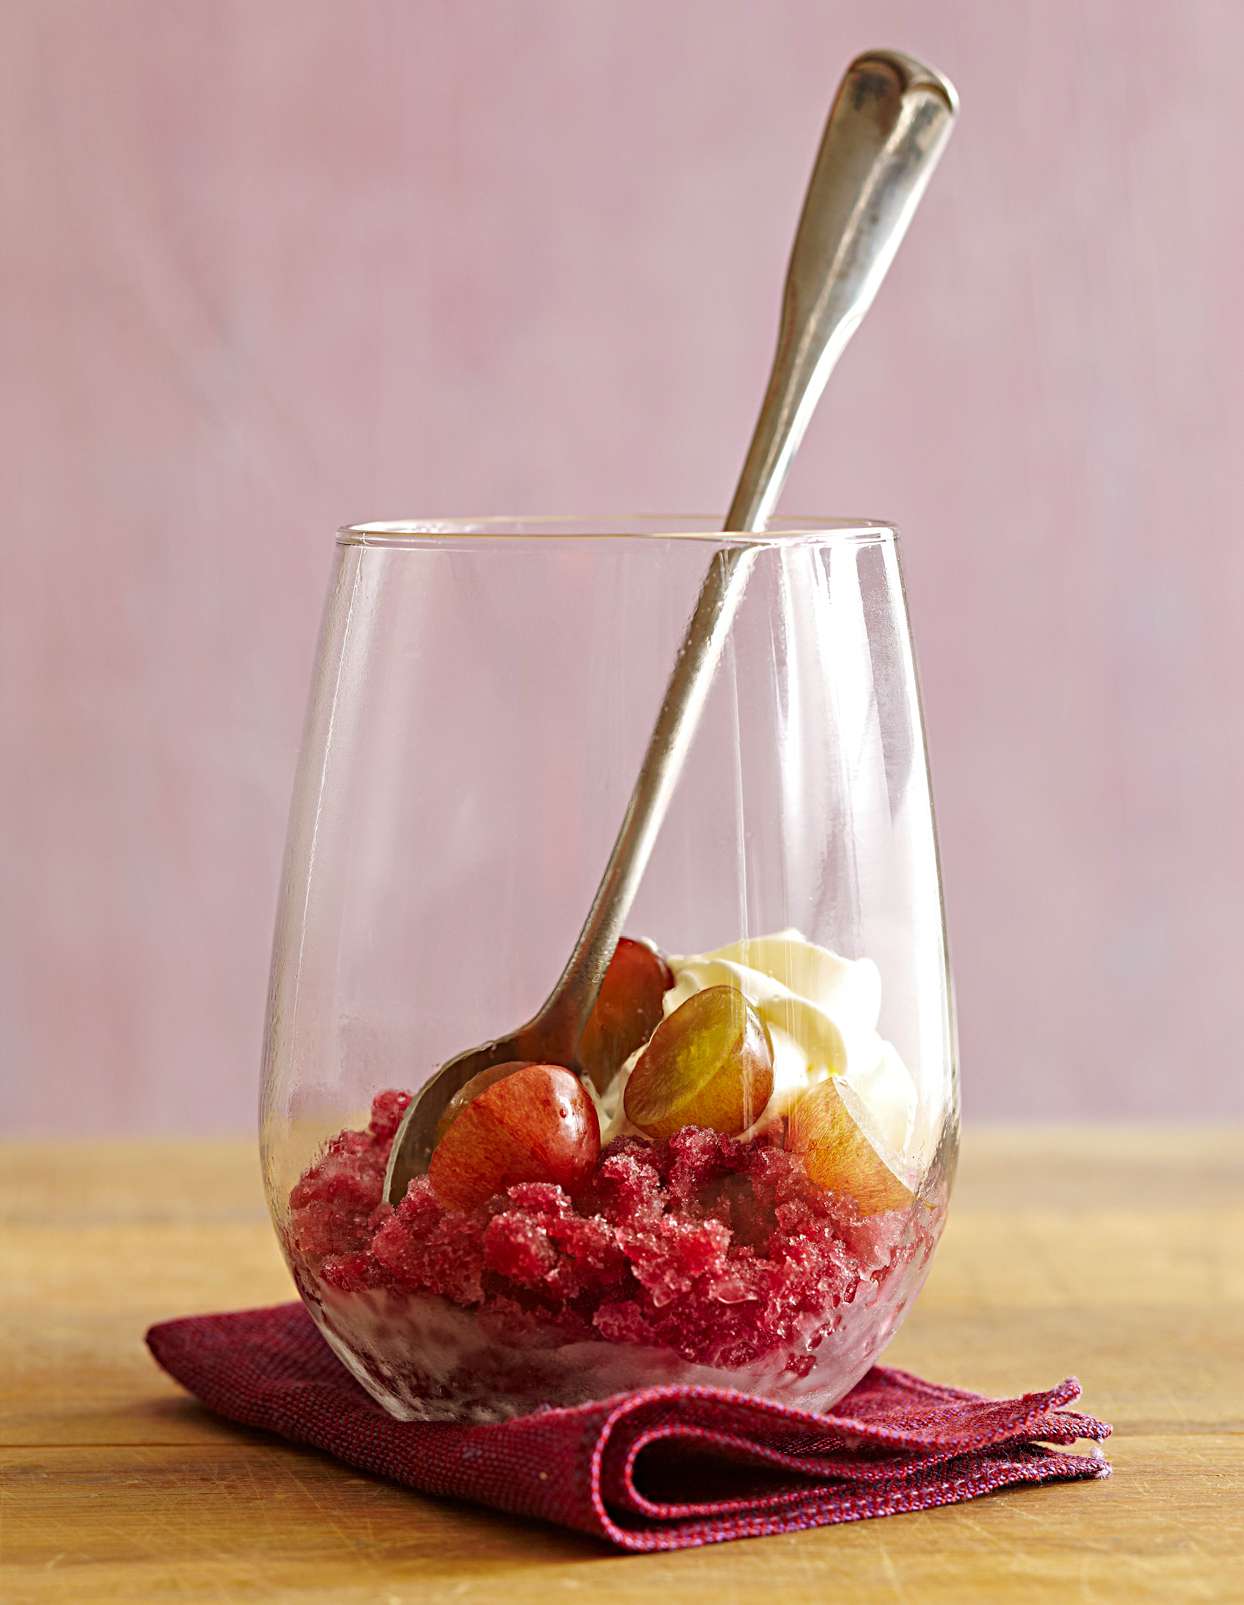 Spiced Zinfandel Granita with Grapes and Cream